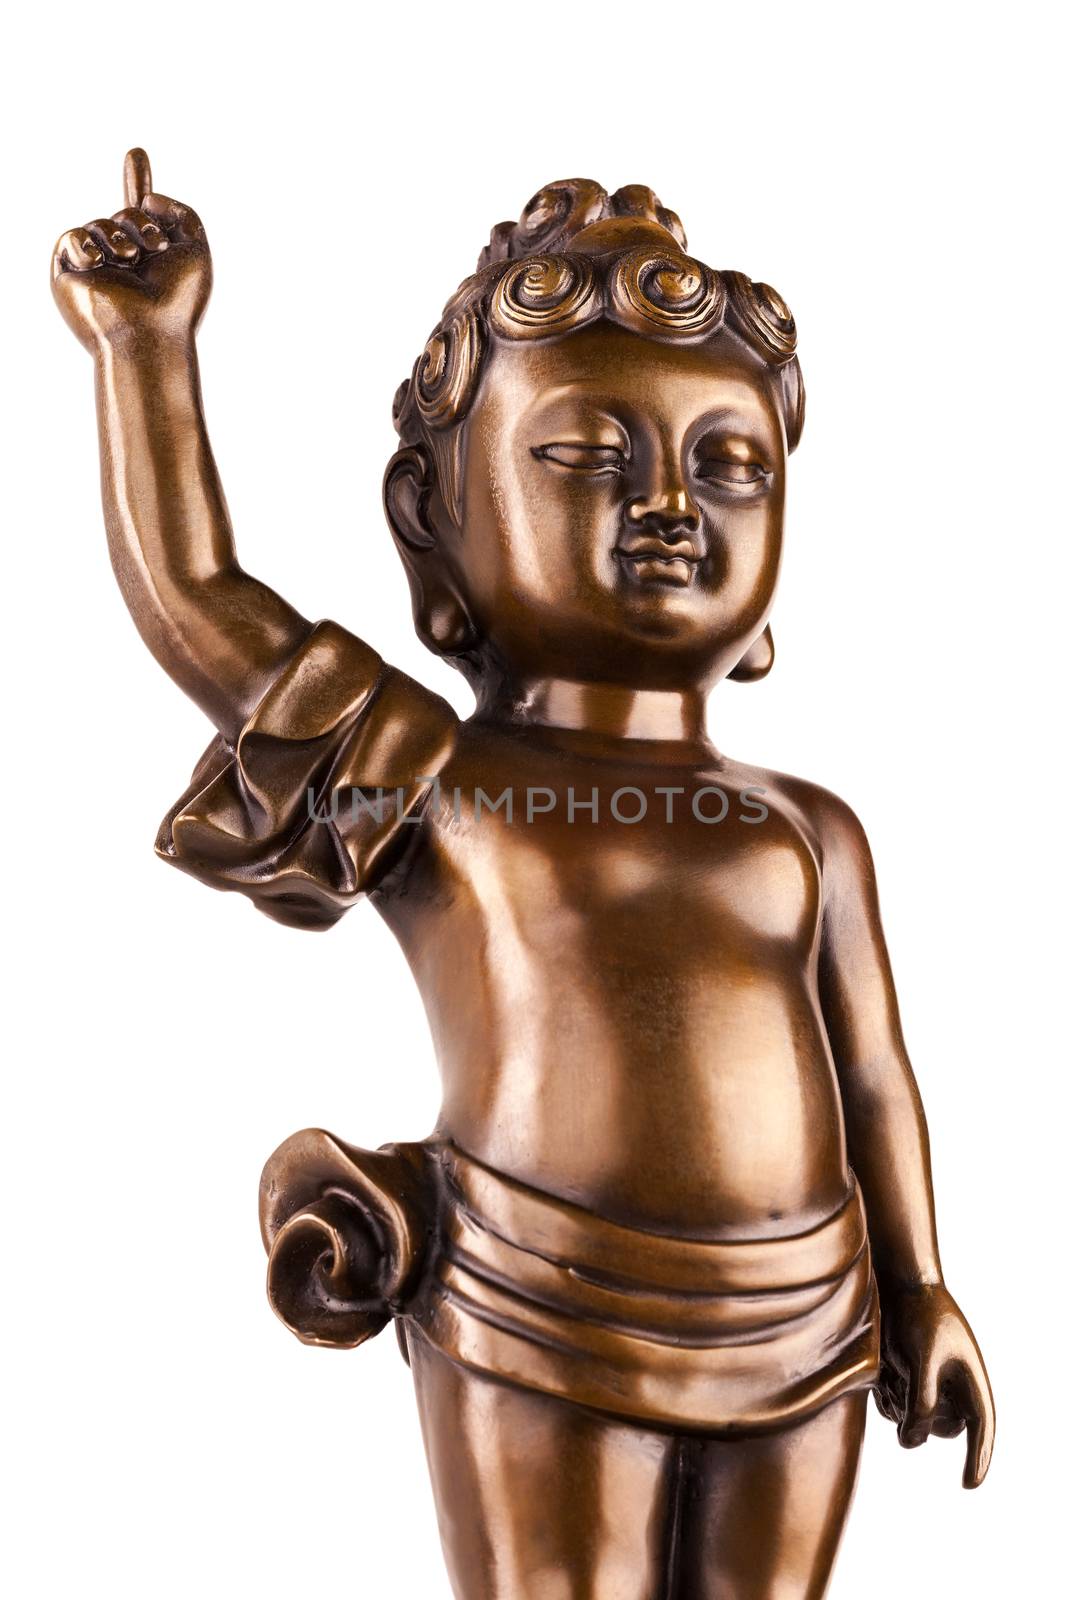 Young prince Siddhartha Gautama. The figure made of metal isolated on a white background.